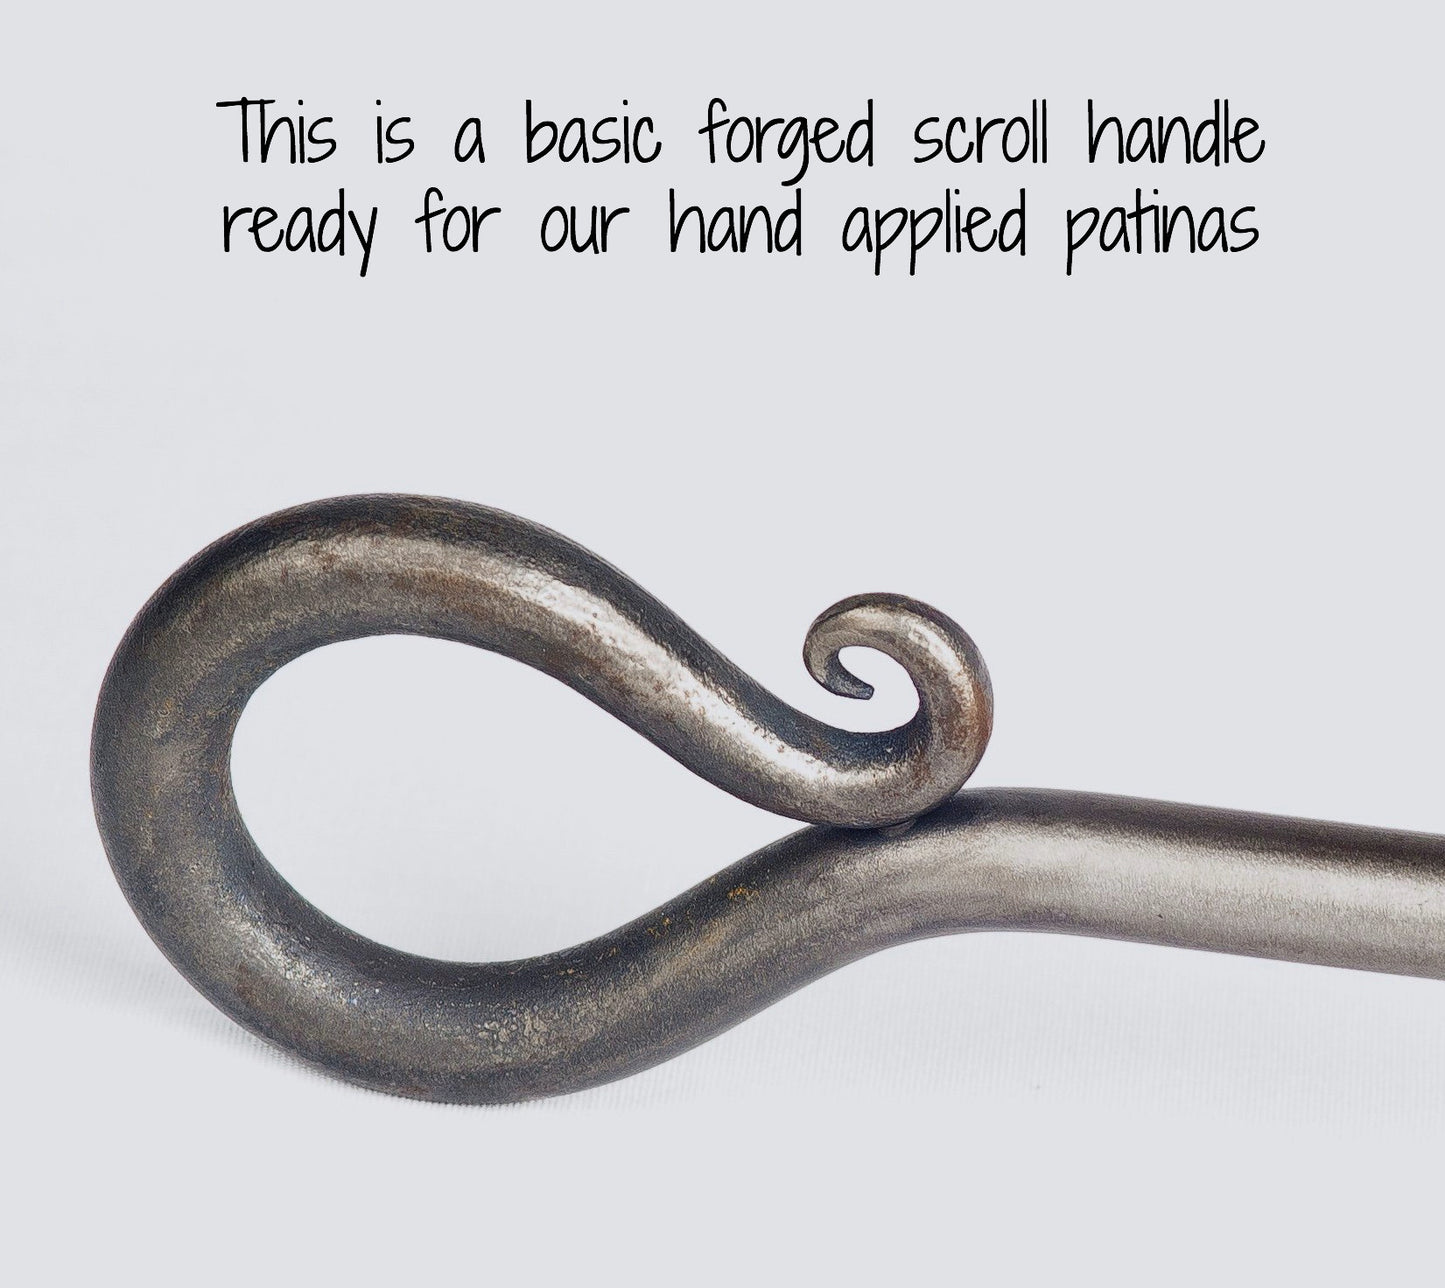 Scroll Handles are a traditional design that is time less in style and comfortable in your hand